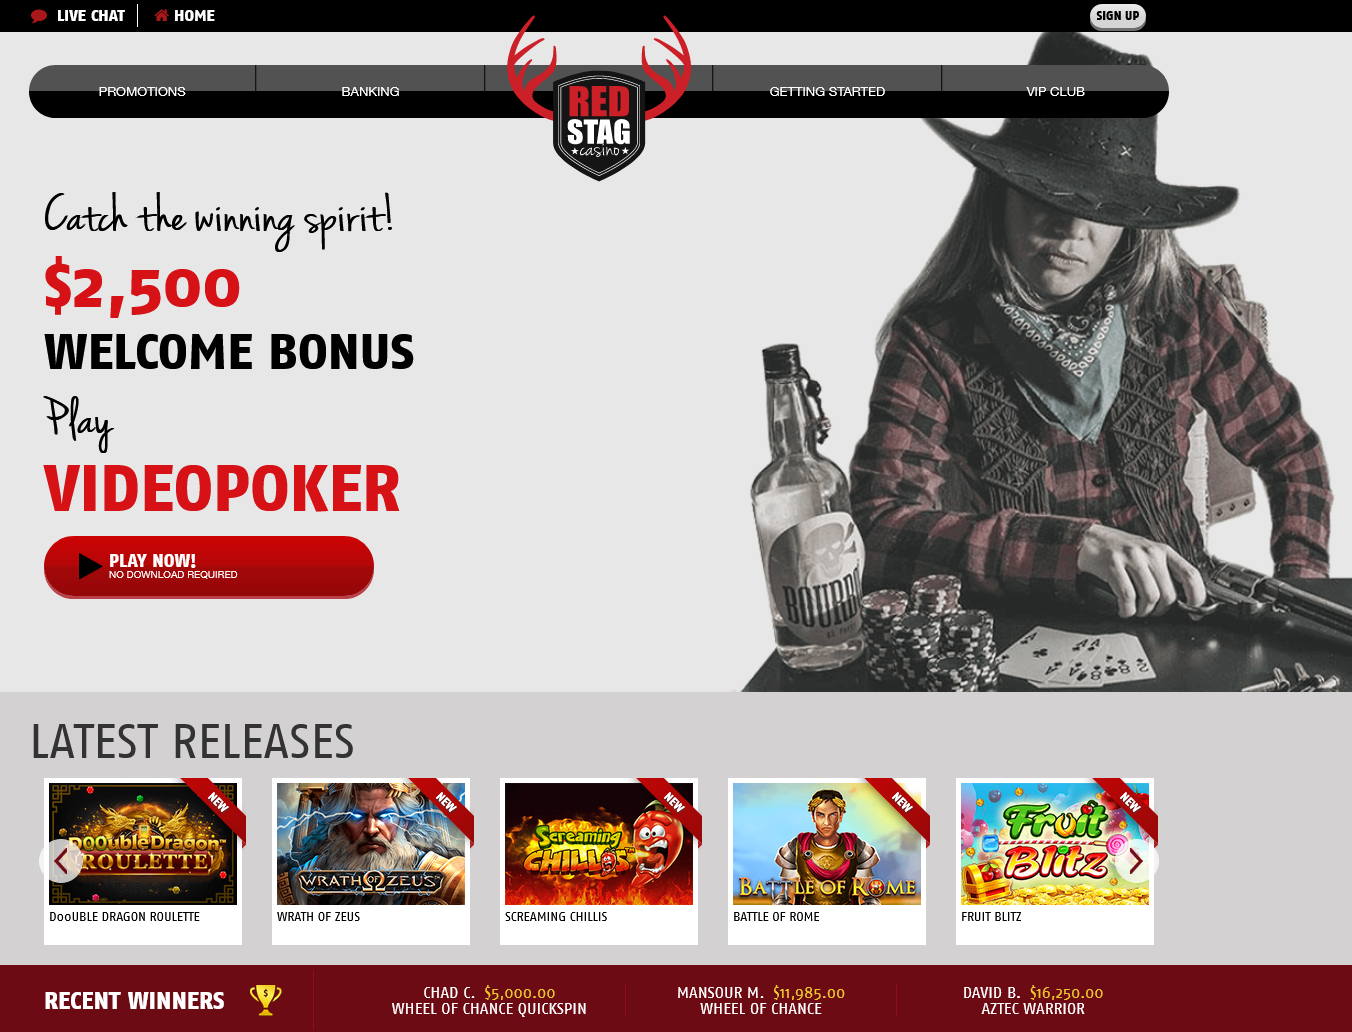 Red Stag
                                                          USD Video
                                                          Poker